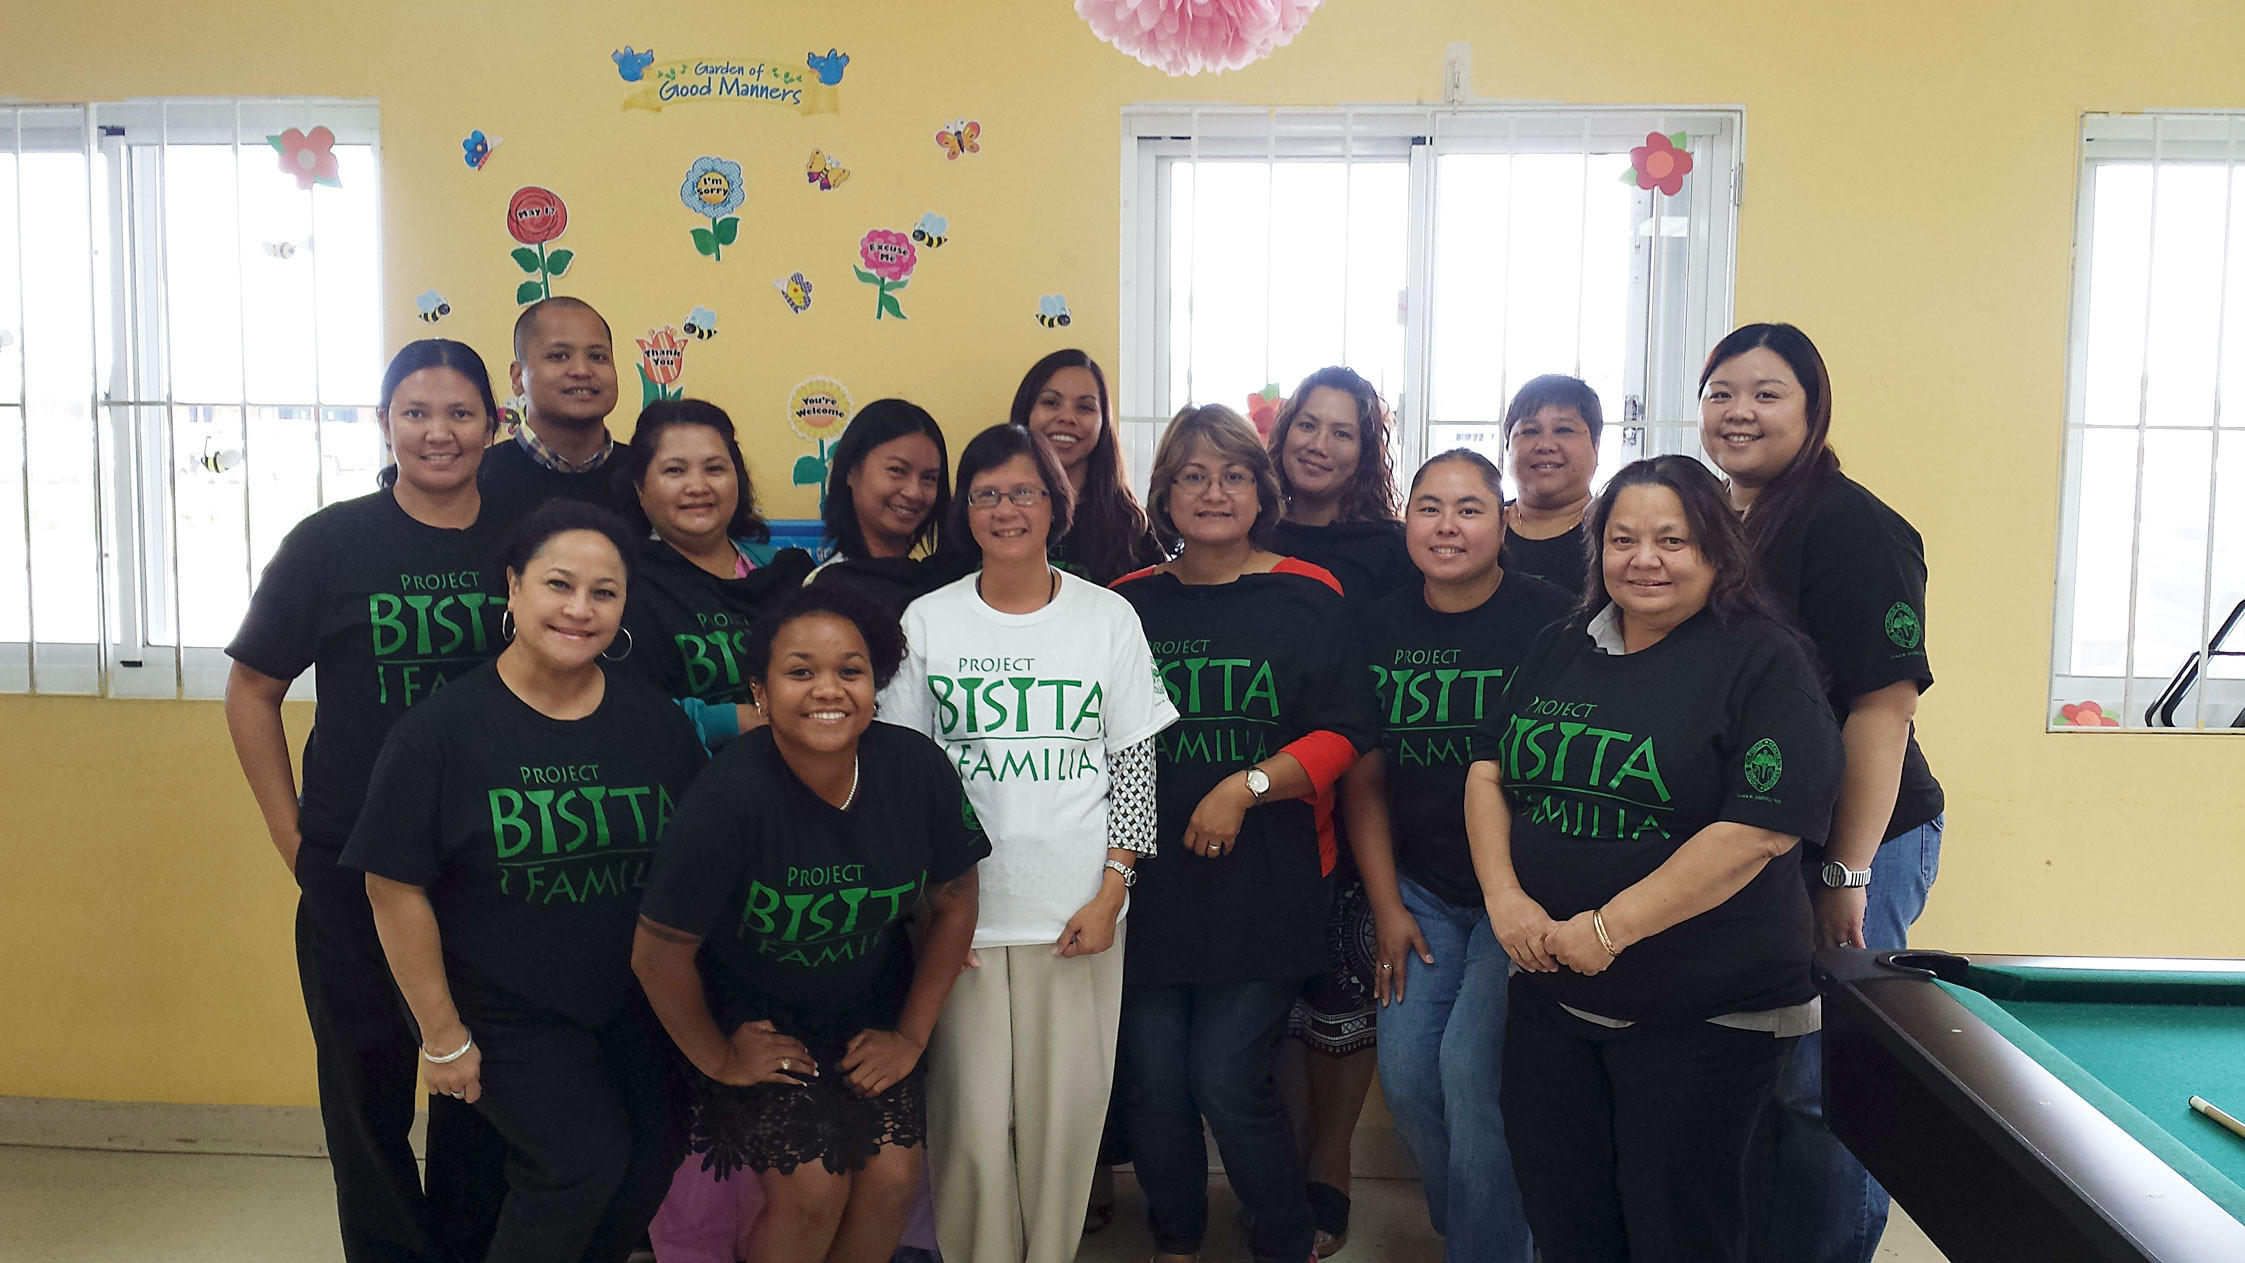 Group wearing Project Bisita T-shirts posing for photo.